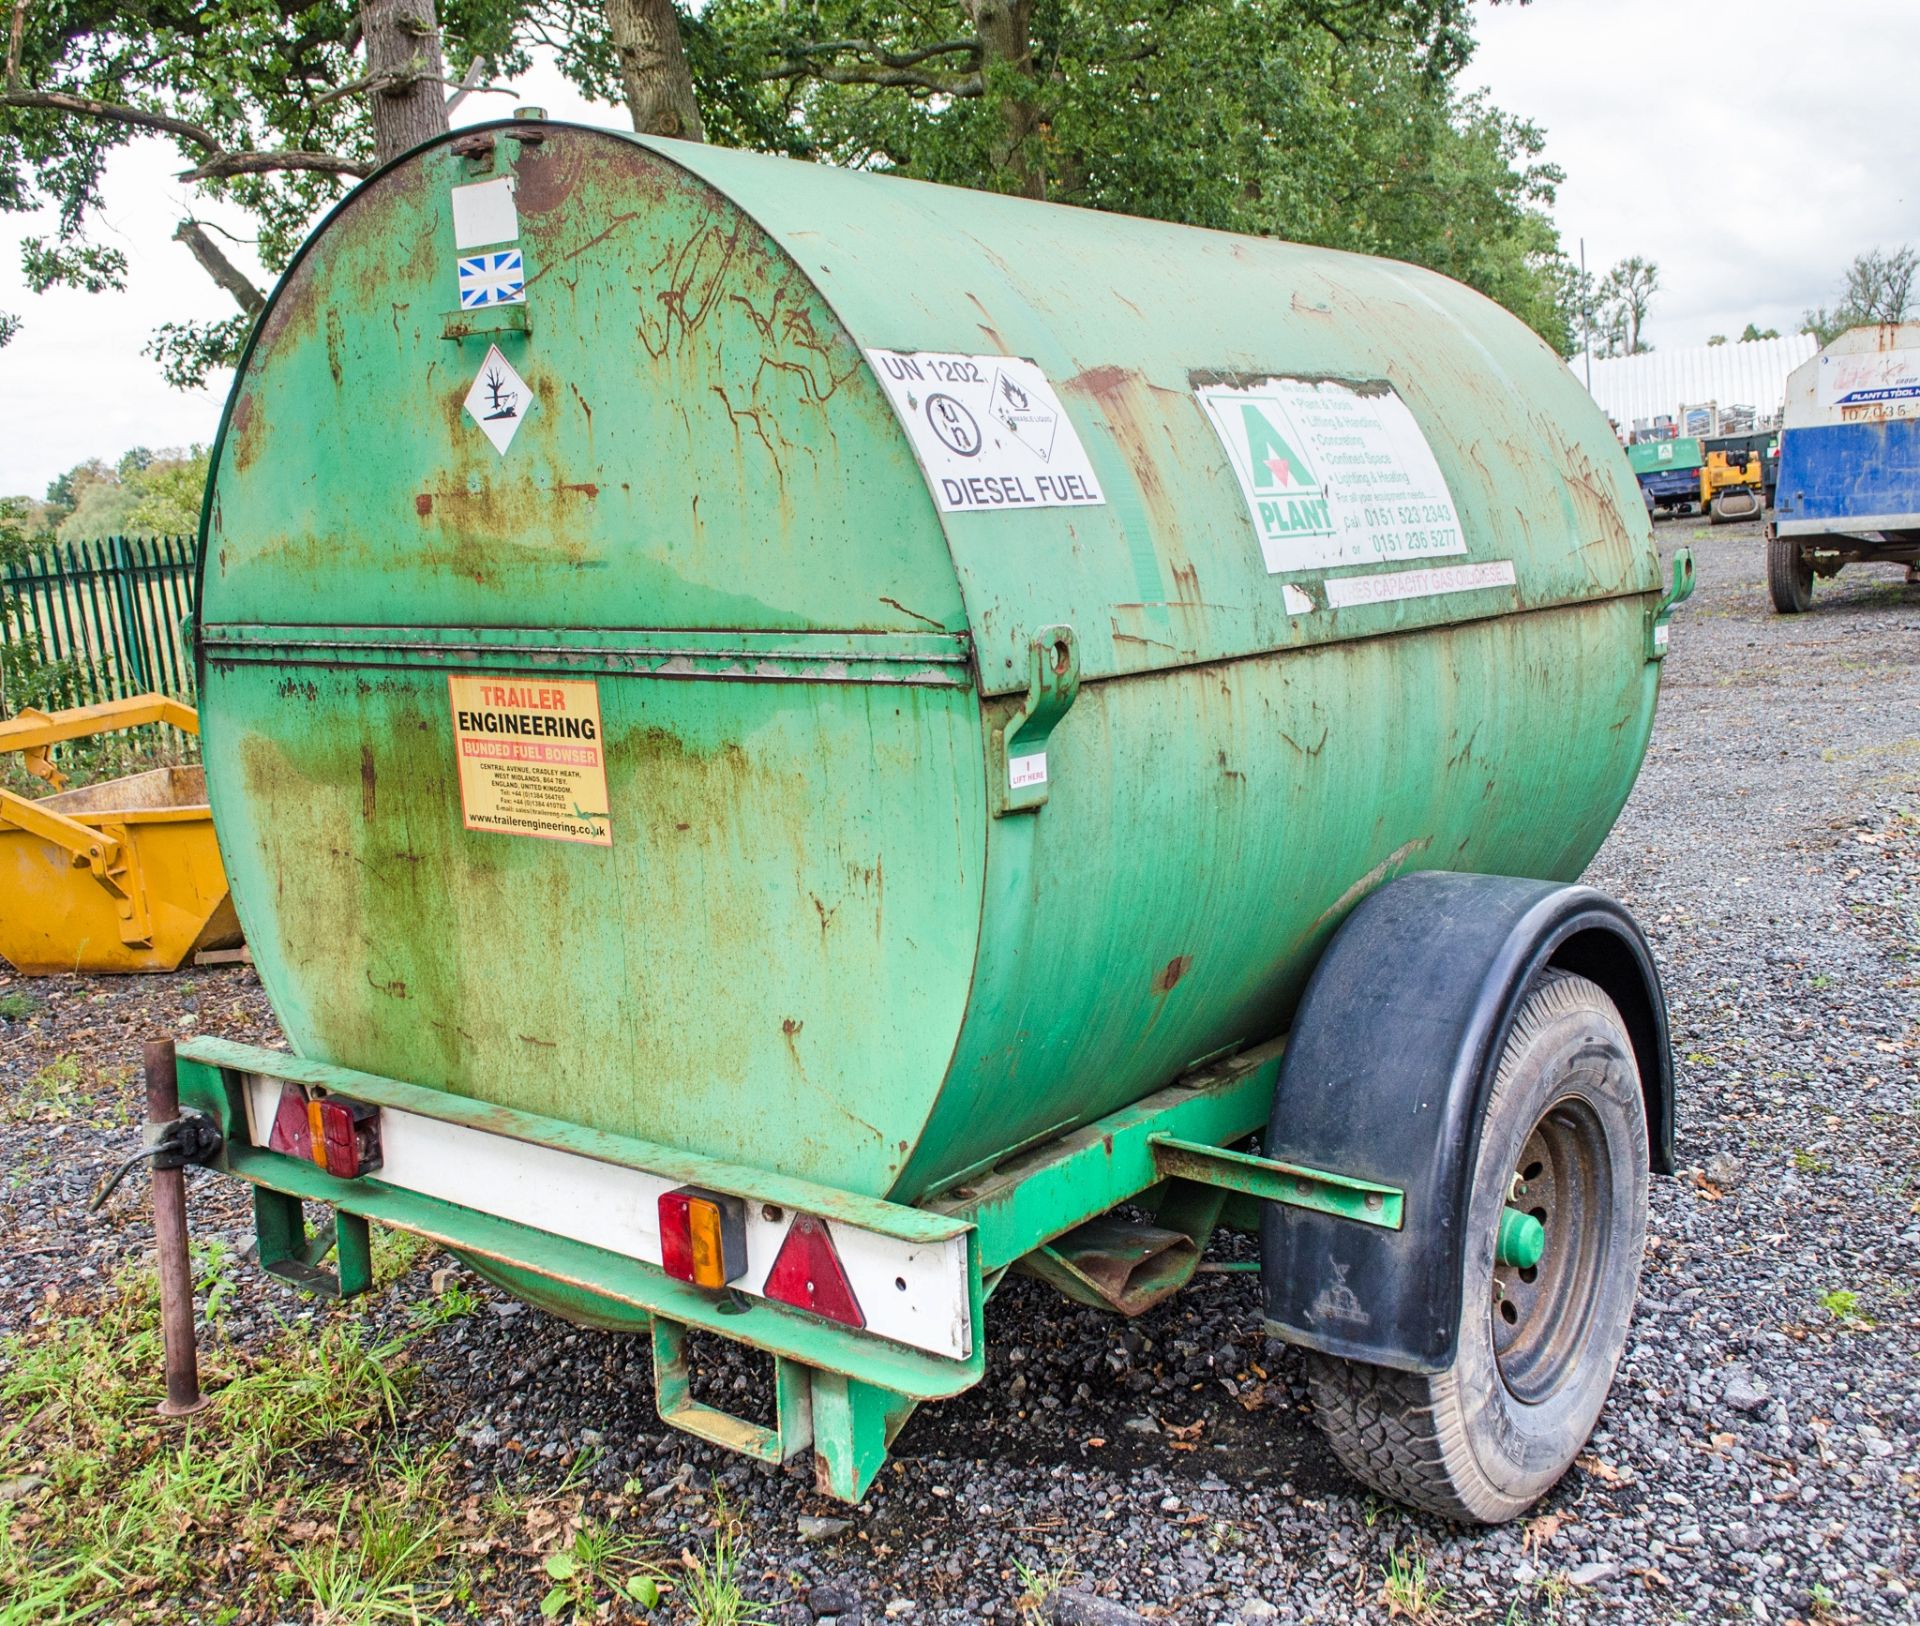 Trailer Engineering 2140 litre fast tow bunded fuel bowser c/w manual pump, delivery hose and nozzle - Image 2 of 5